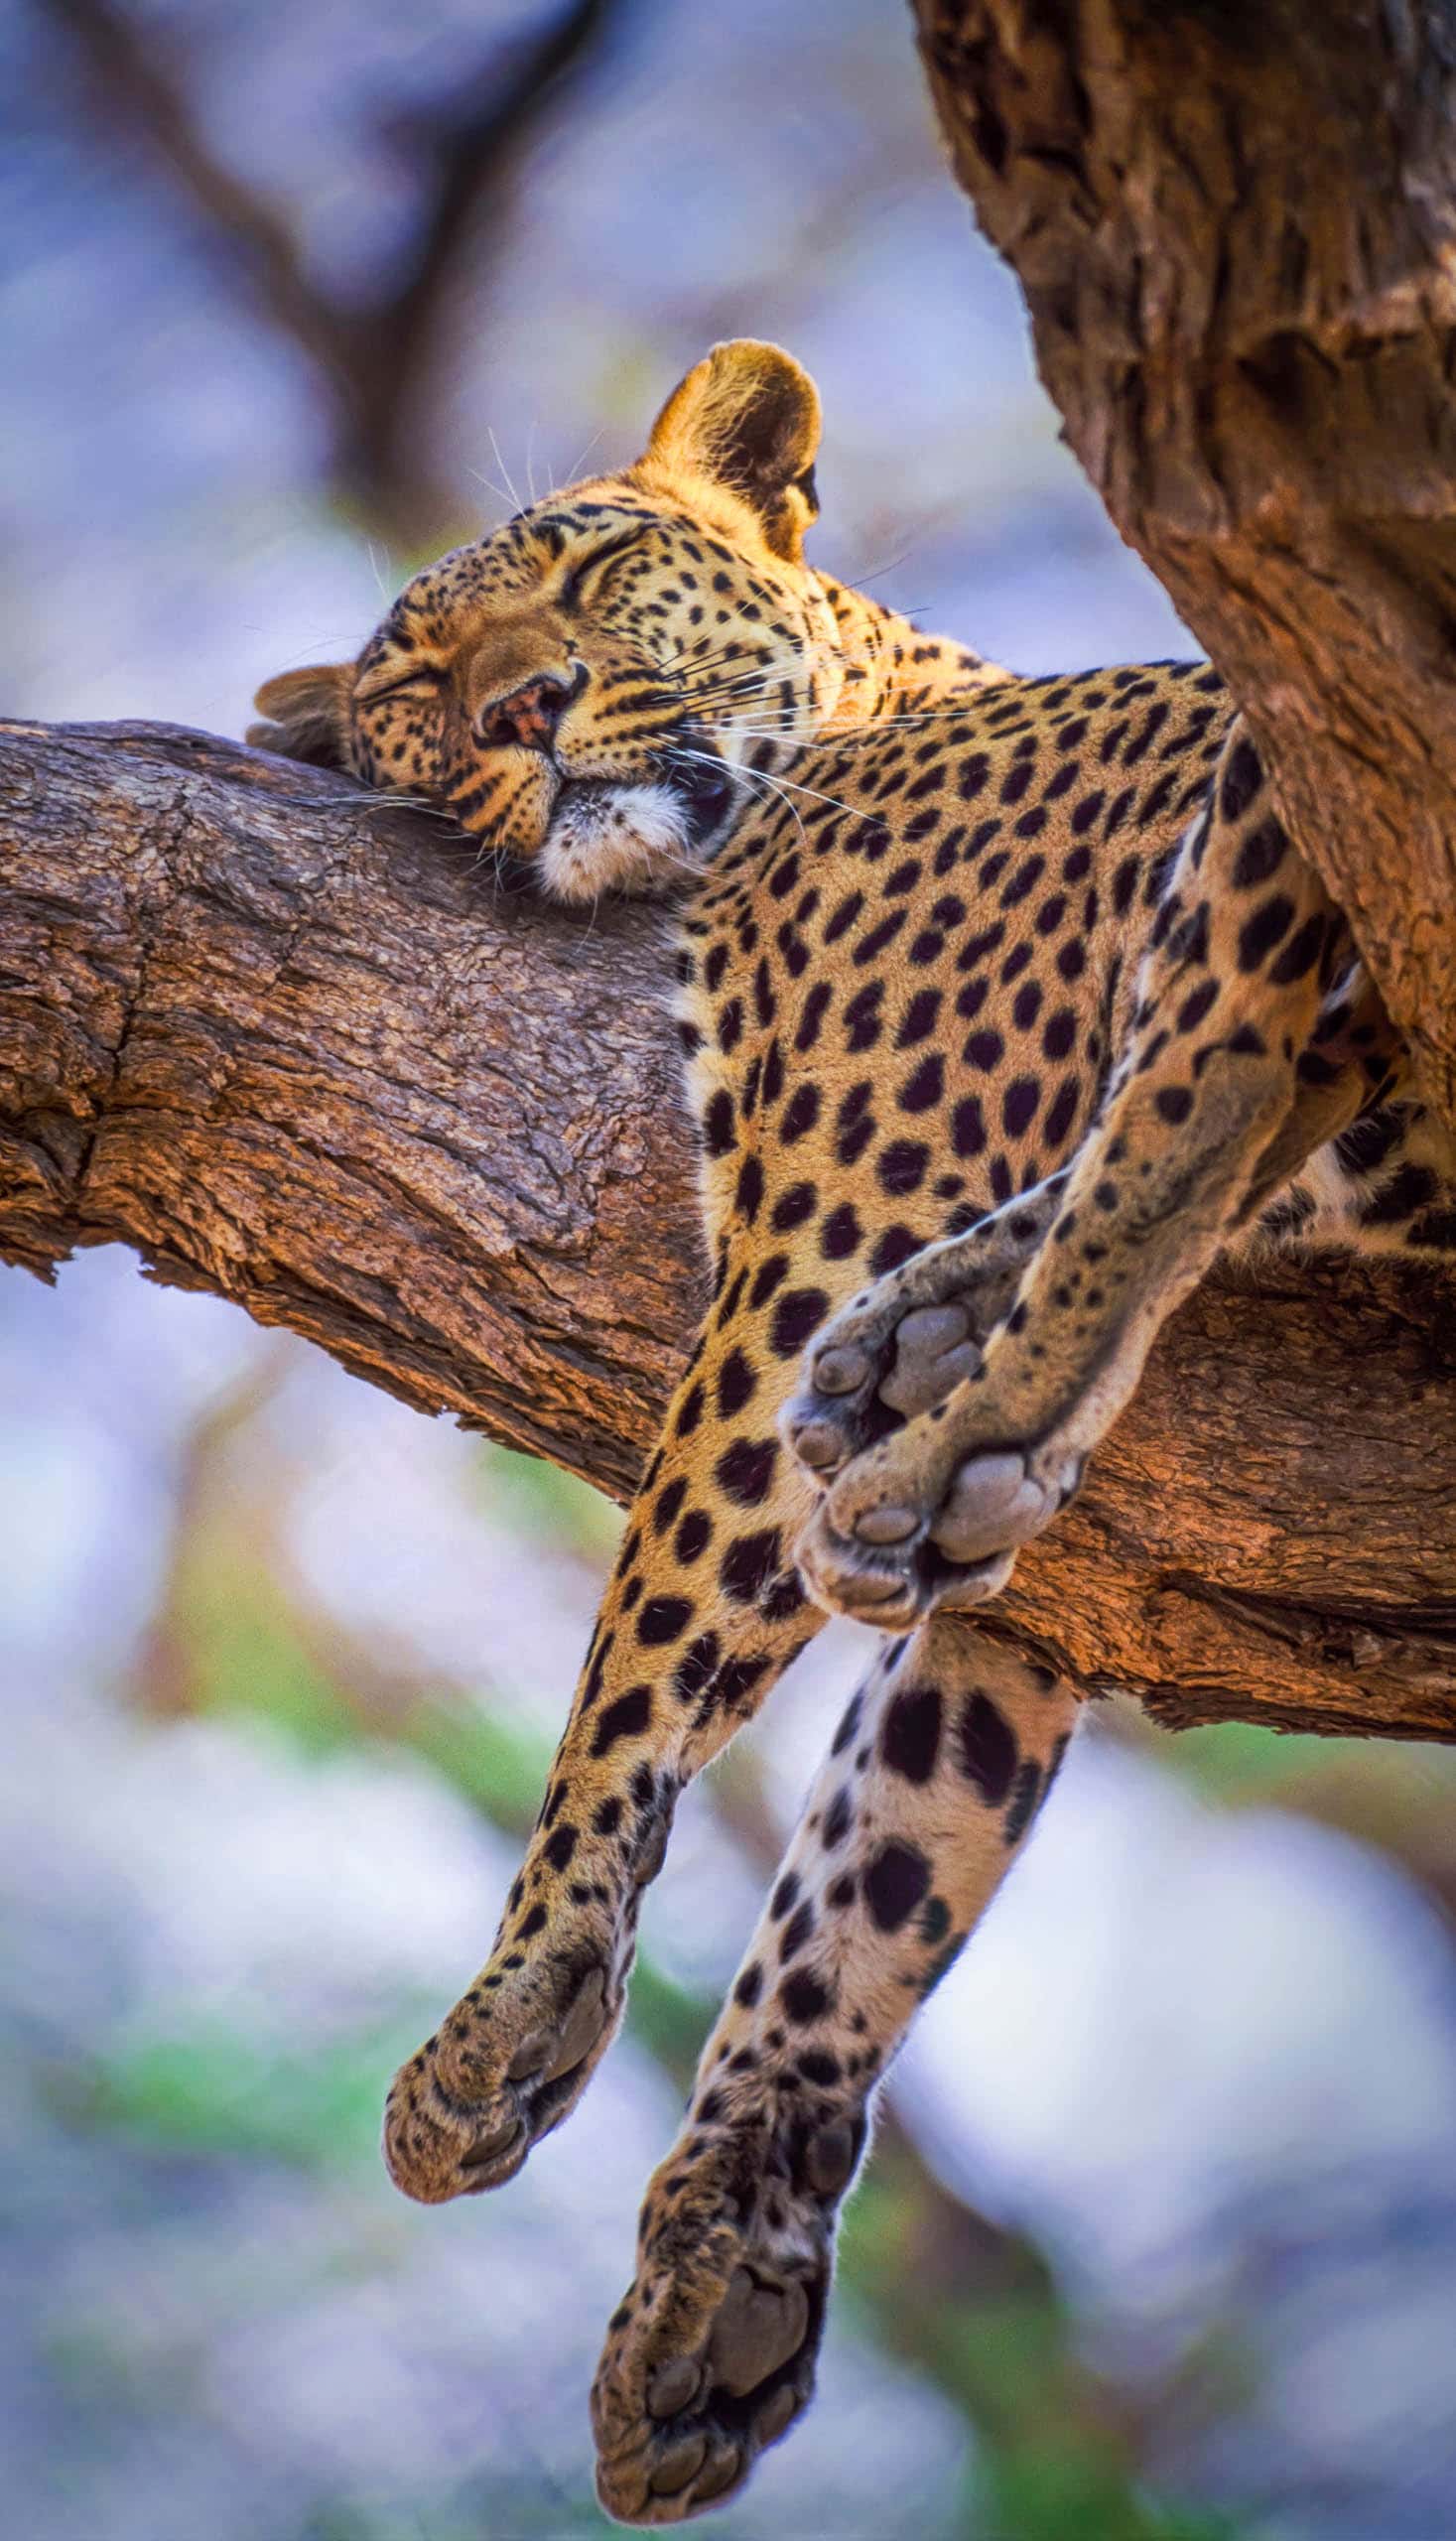 A leopard in a tree.